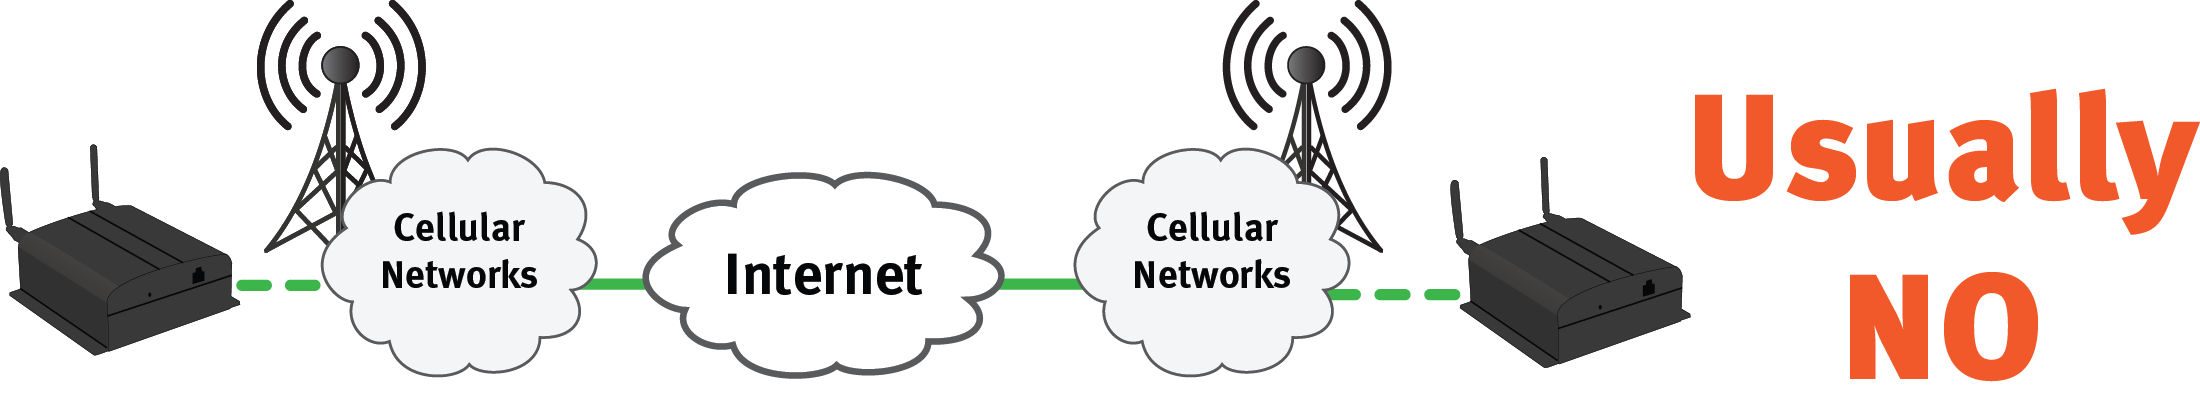 Cellular Data Network does not connec to the Internet